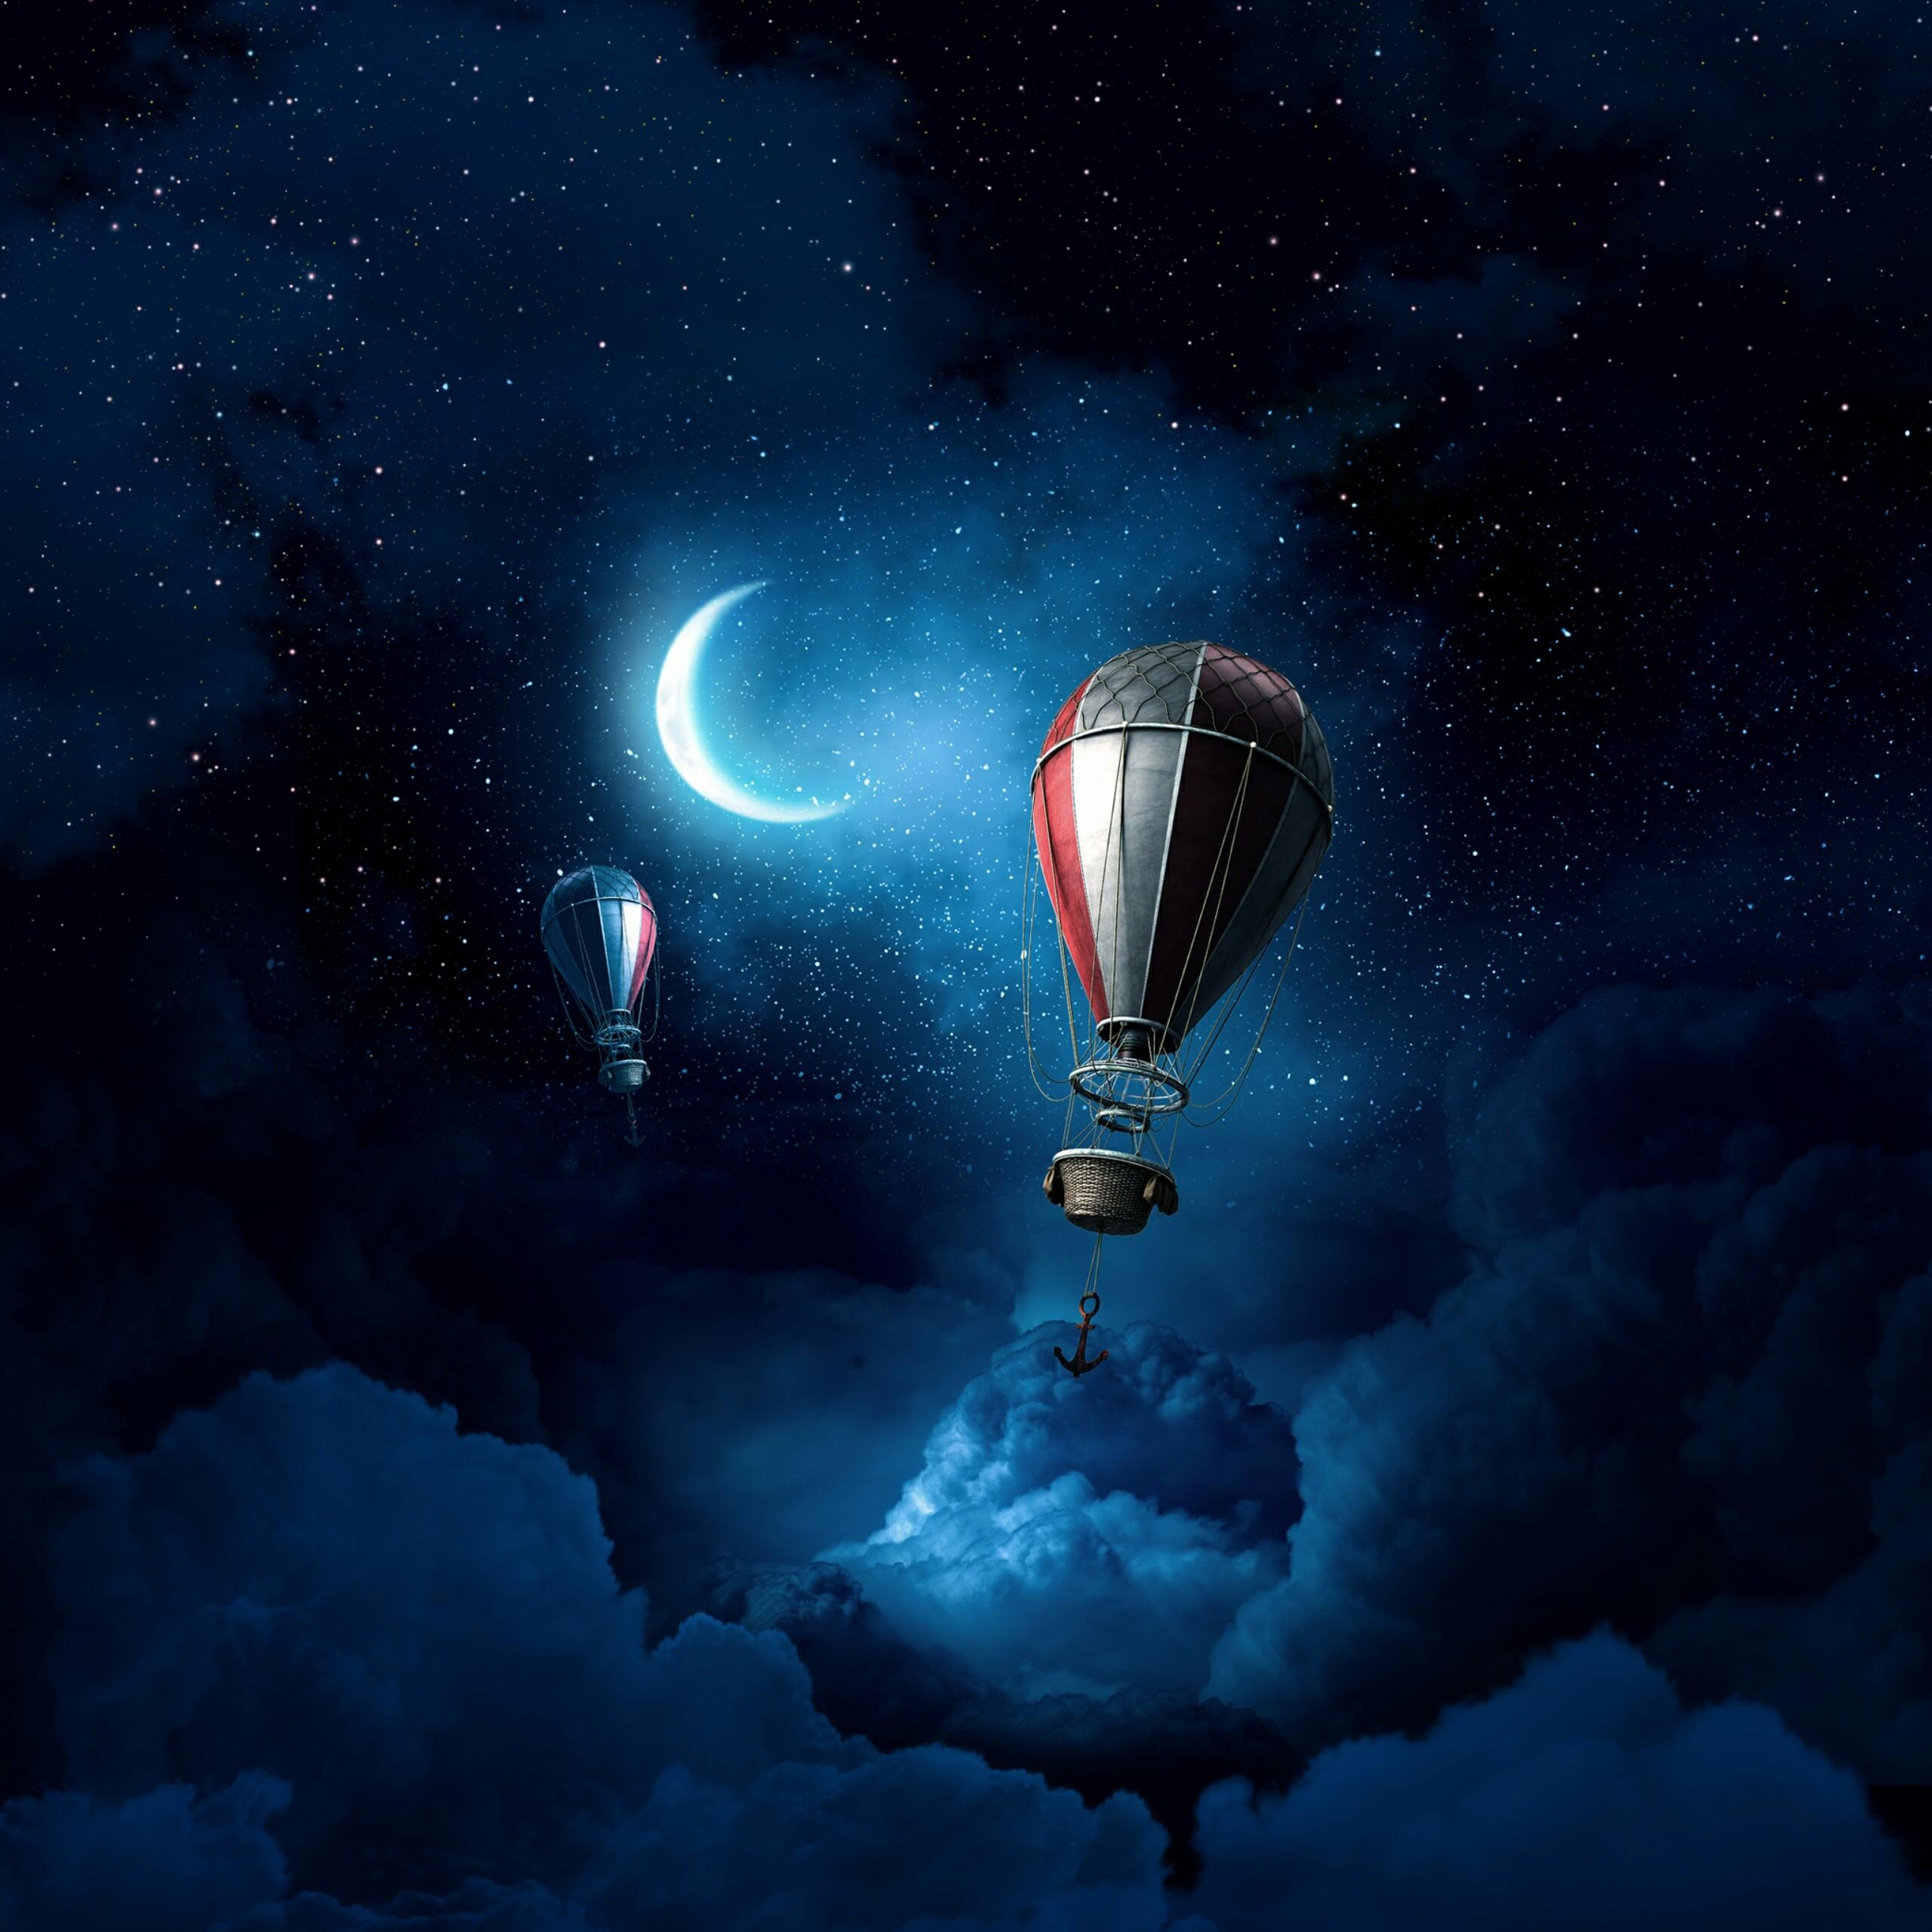 Hot Air Baloon Anchored Over The Clouds On A Starry Night Fantasy